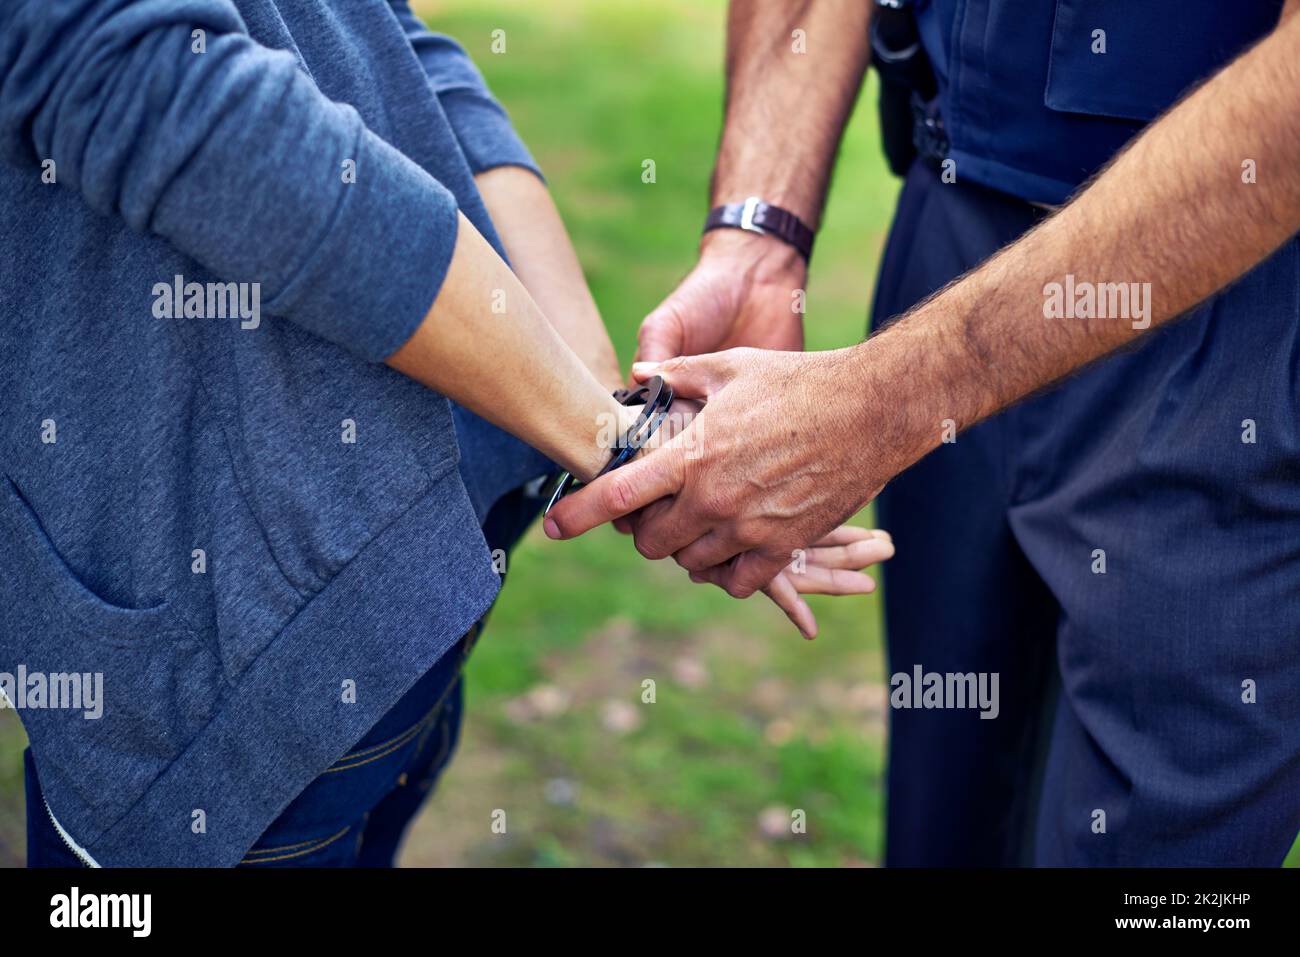 Thatll hold you. Cropped shot of a policemans hands putting cuffs on a suspect. Stock Photo